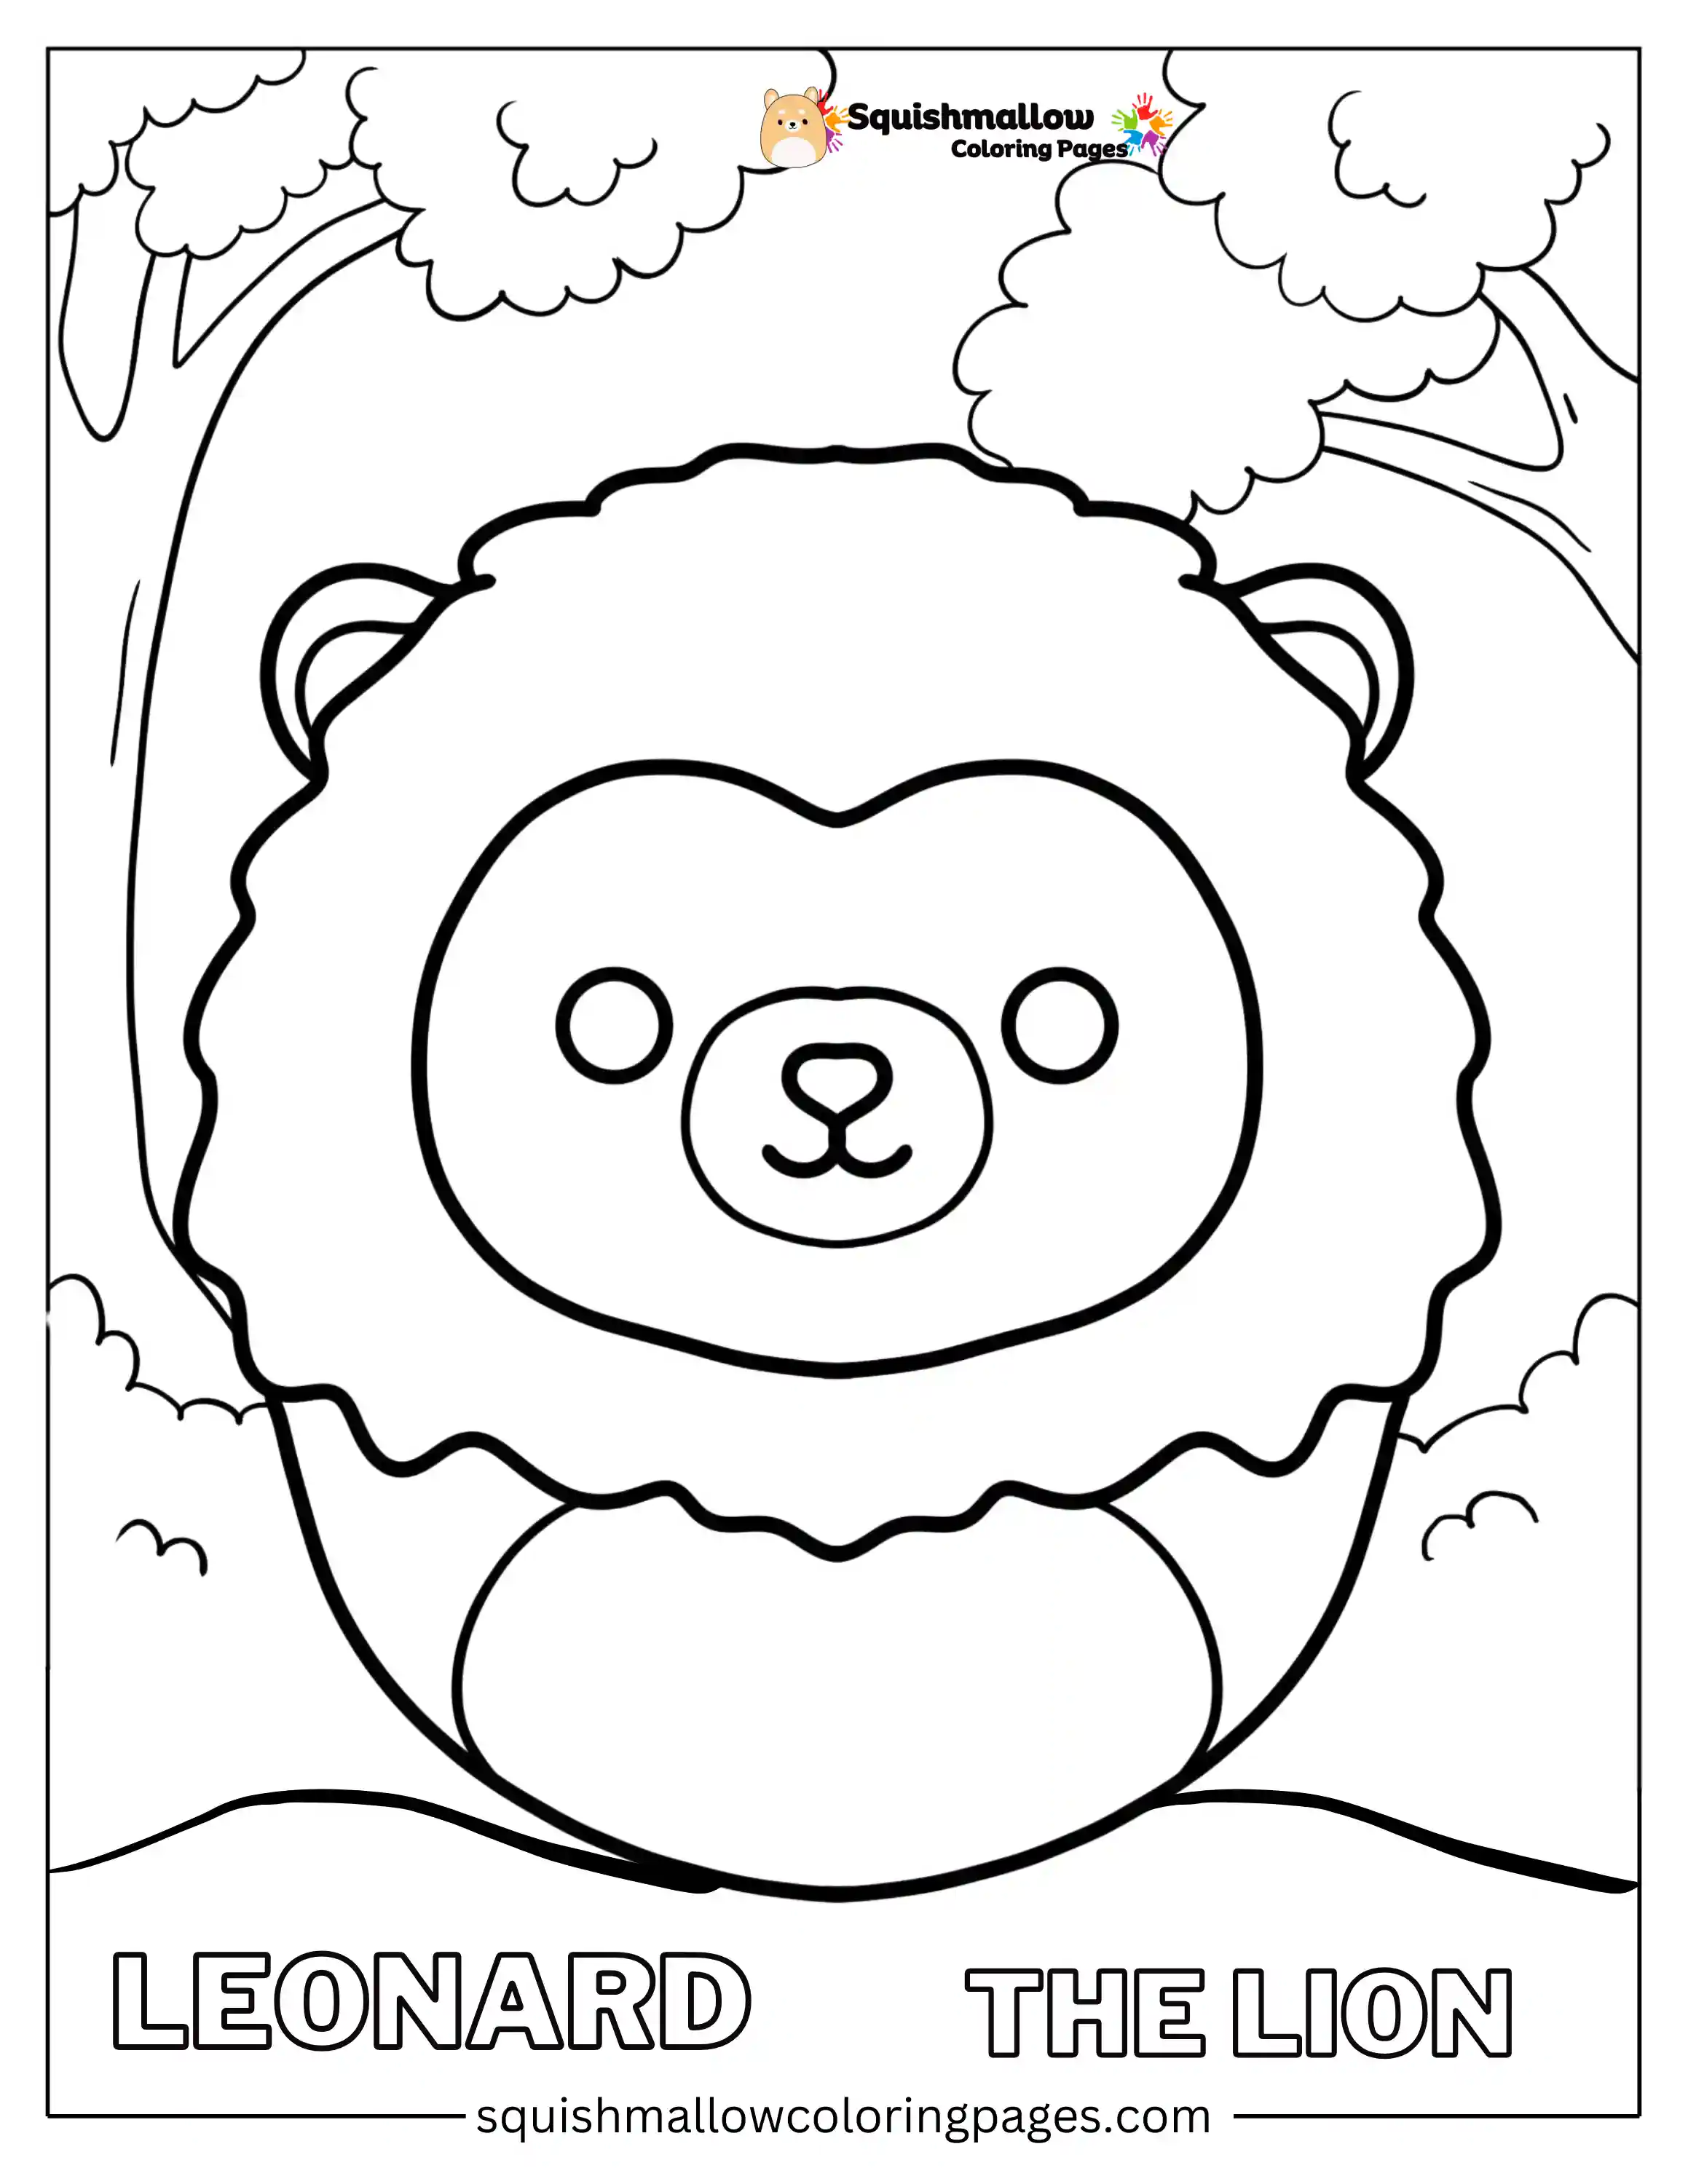 Leonard The Lion Squishmallow Coloring Pages